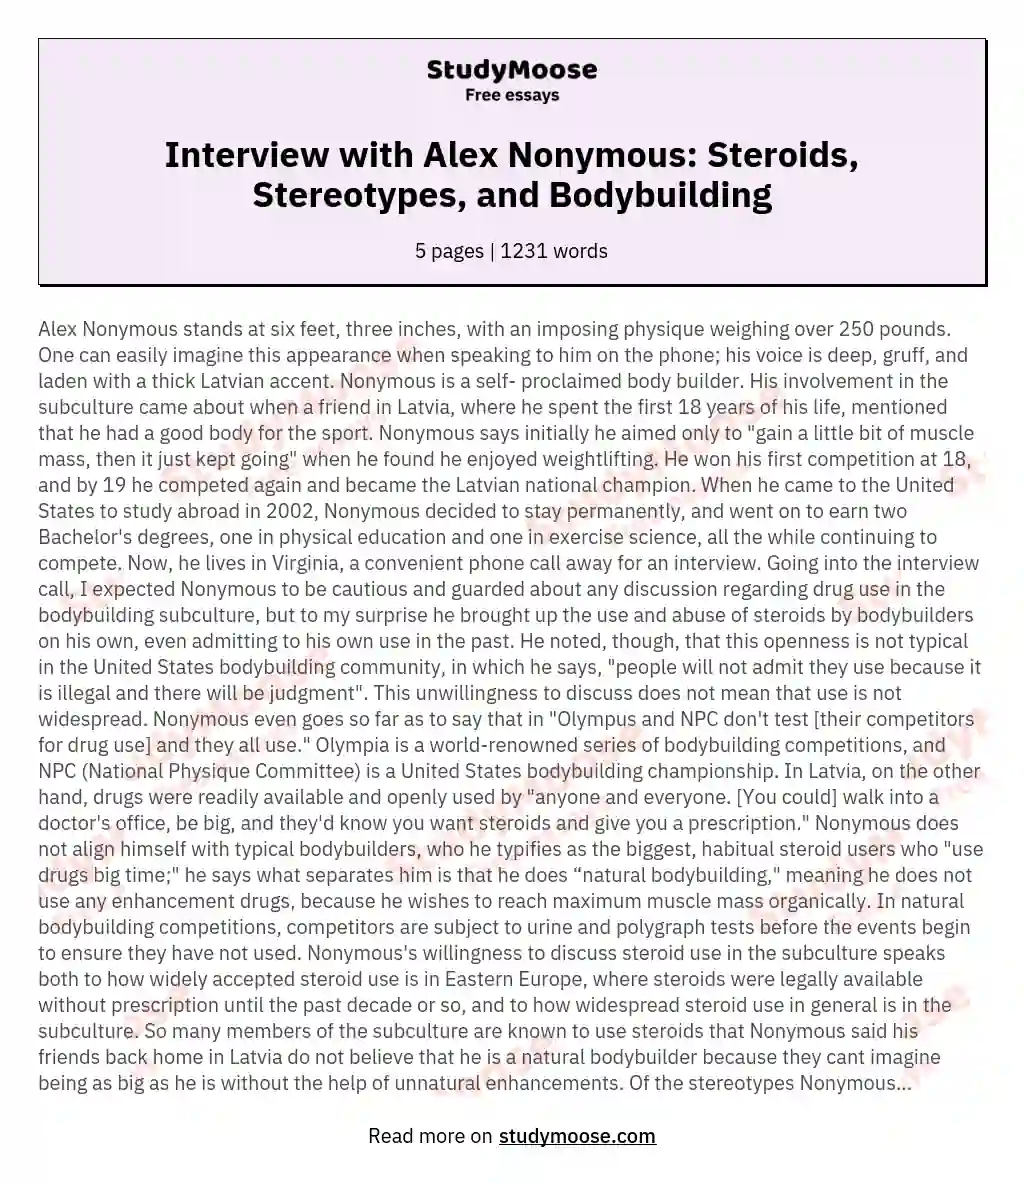 Interview with Alex Nonymous: Steroids, Stereotypes, and Bodybuilding essay